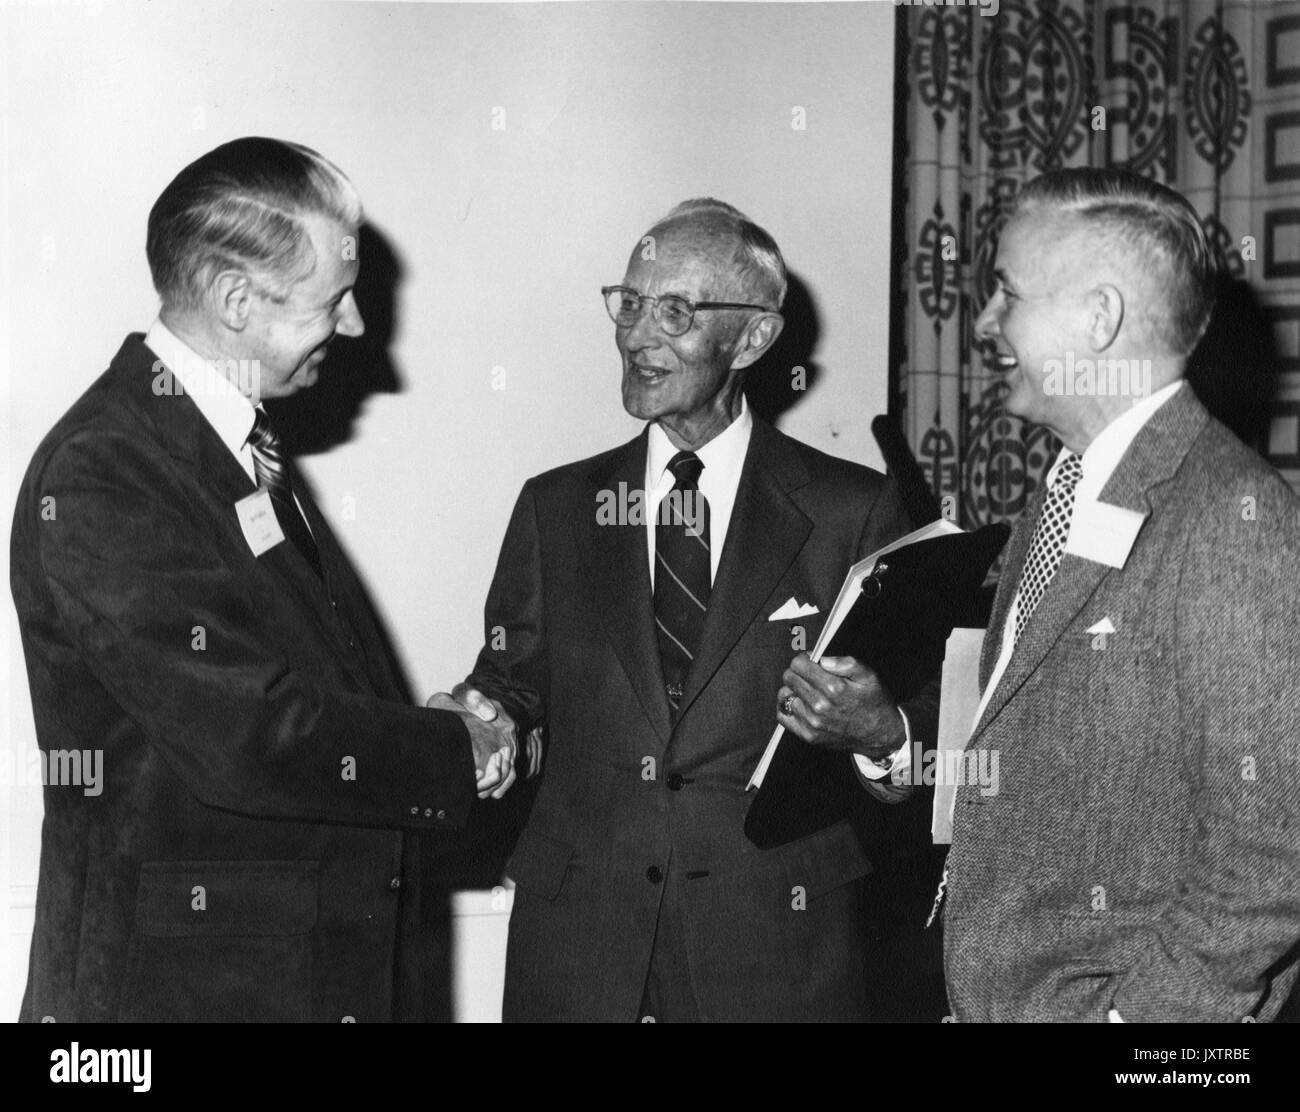 Alonzo Decker, Hays Watkins, Robert Harvery, Campaign for Johns Hopkins Candid group shot at the Greenbrier, Decker at center shaking hands with Watkins, Harvey is to the right of Decker, 1983. Stock Photo